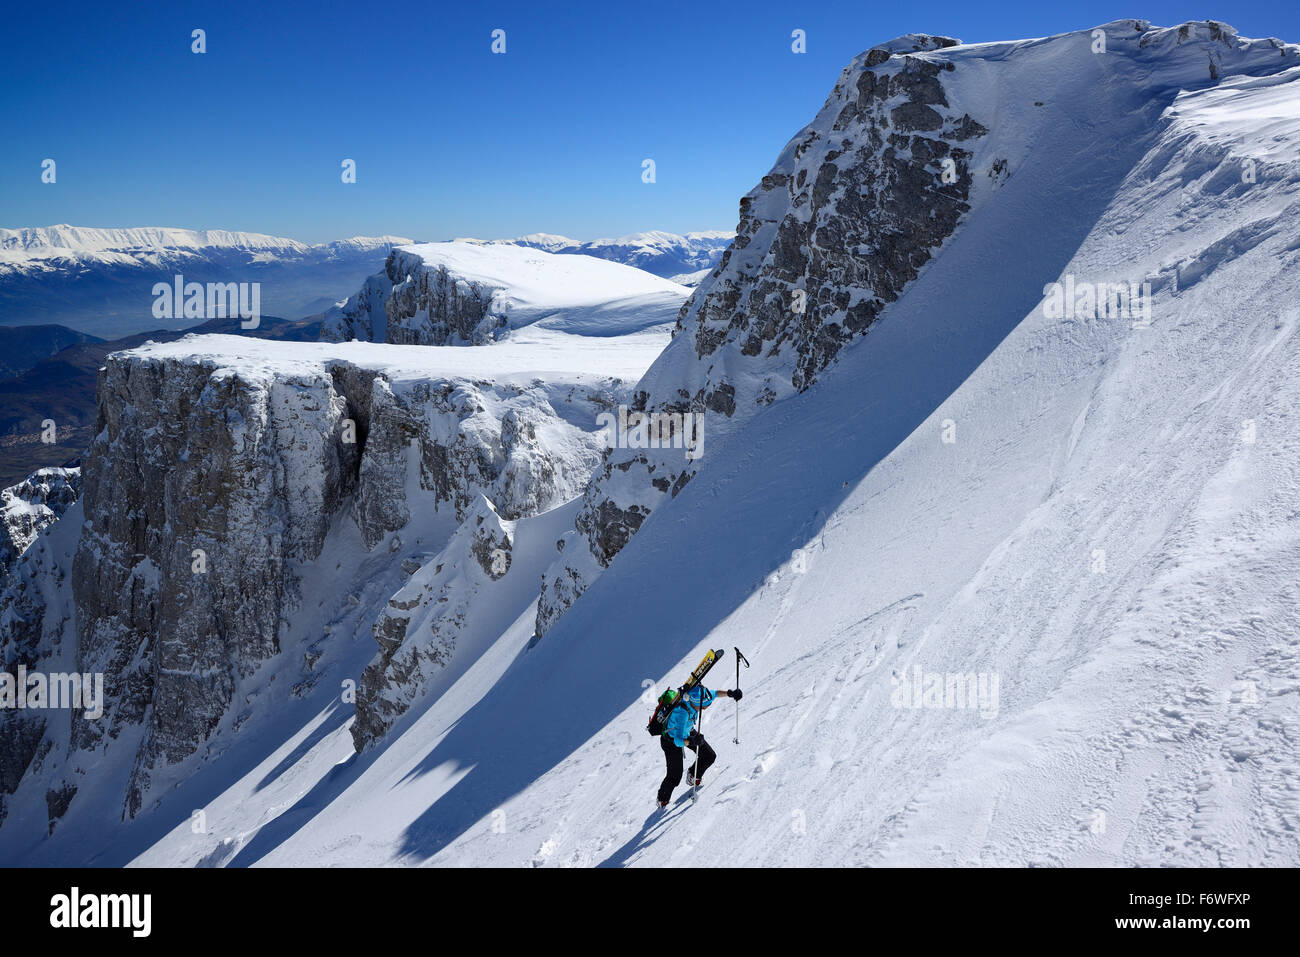 Female backcountry skier ascending through snow-covered cirque at Monte Sirente, Maiella range in background, Valle Lupara, Abru Stock Photo